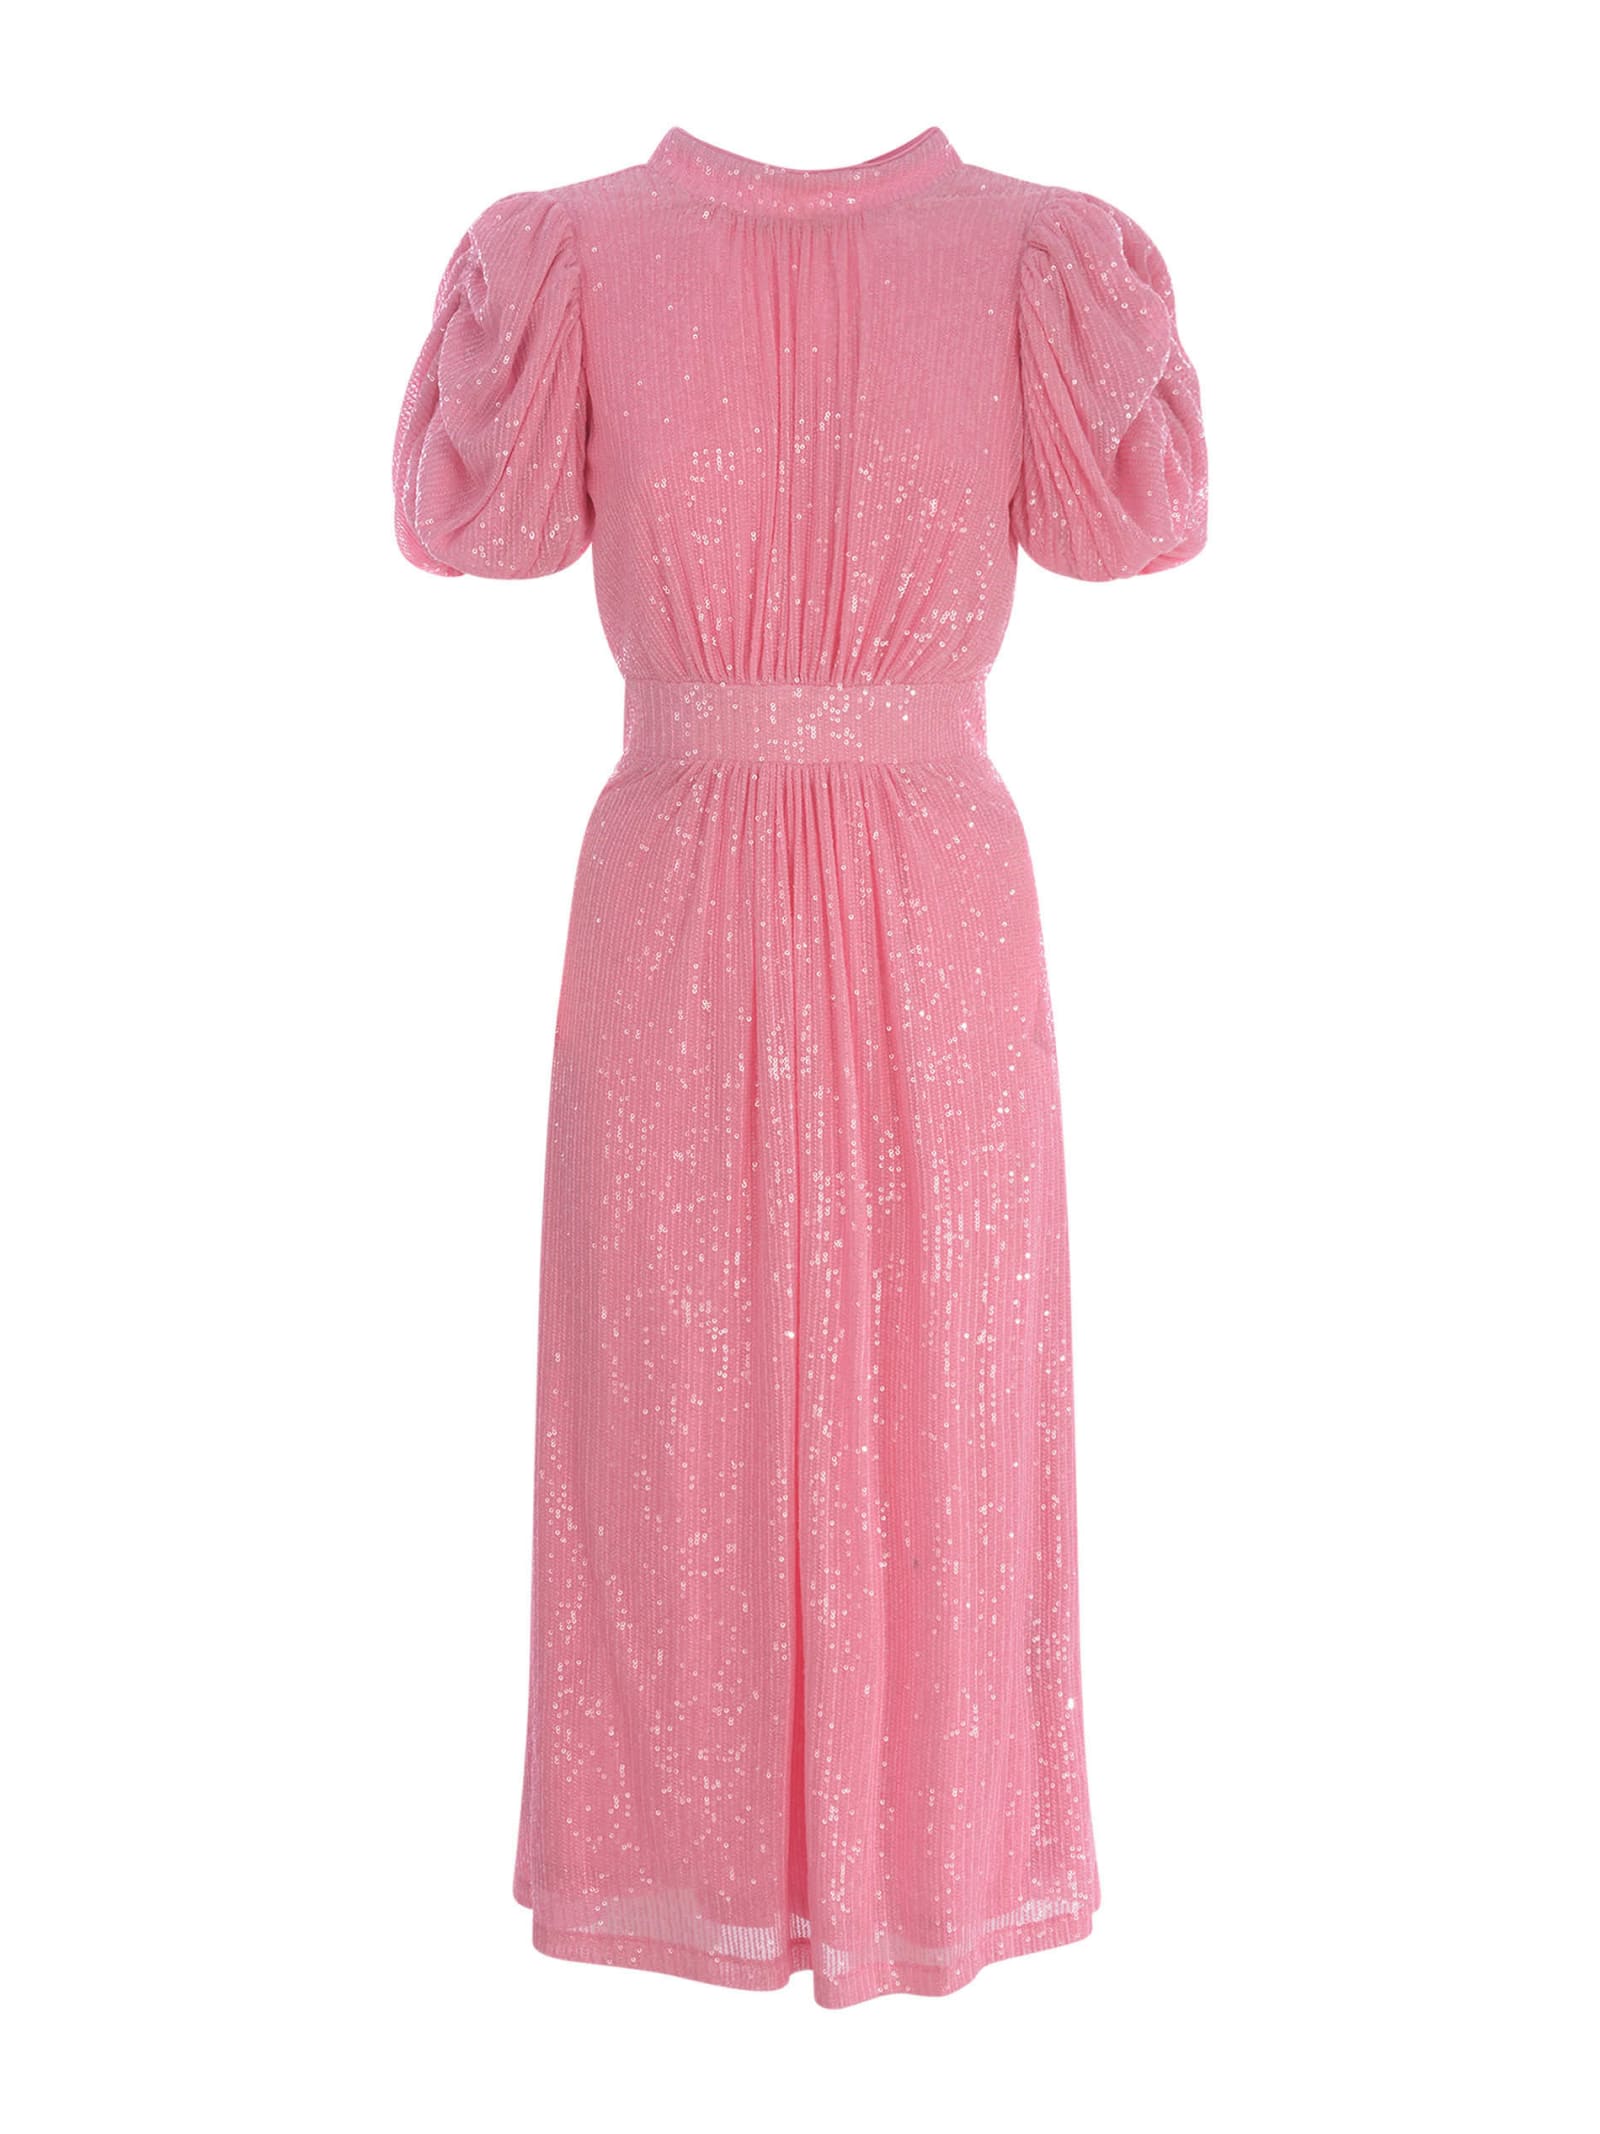 Shop Rotate Birger Christensen Dress Rotate In Micro Sequins In Rosa